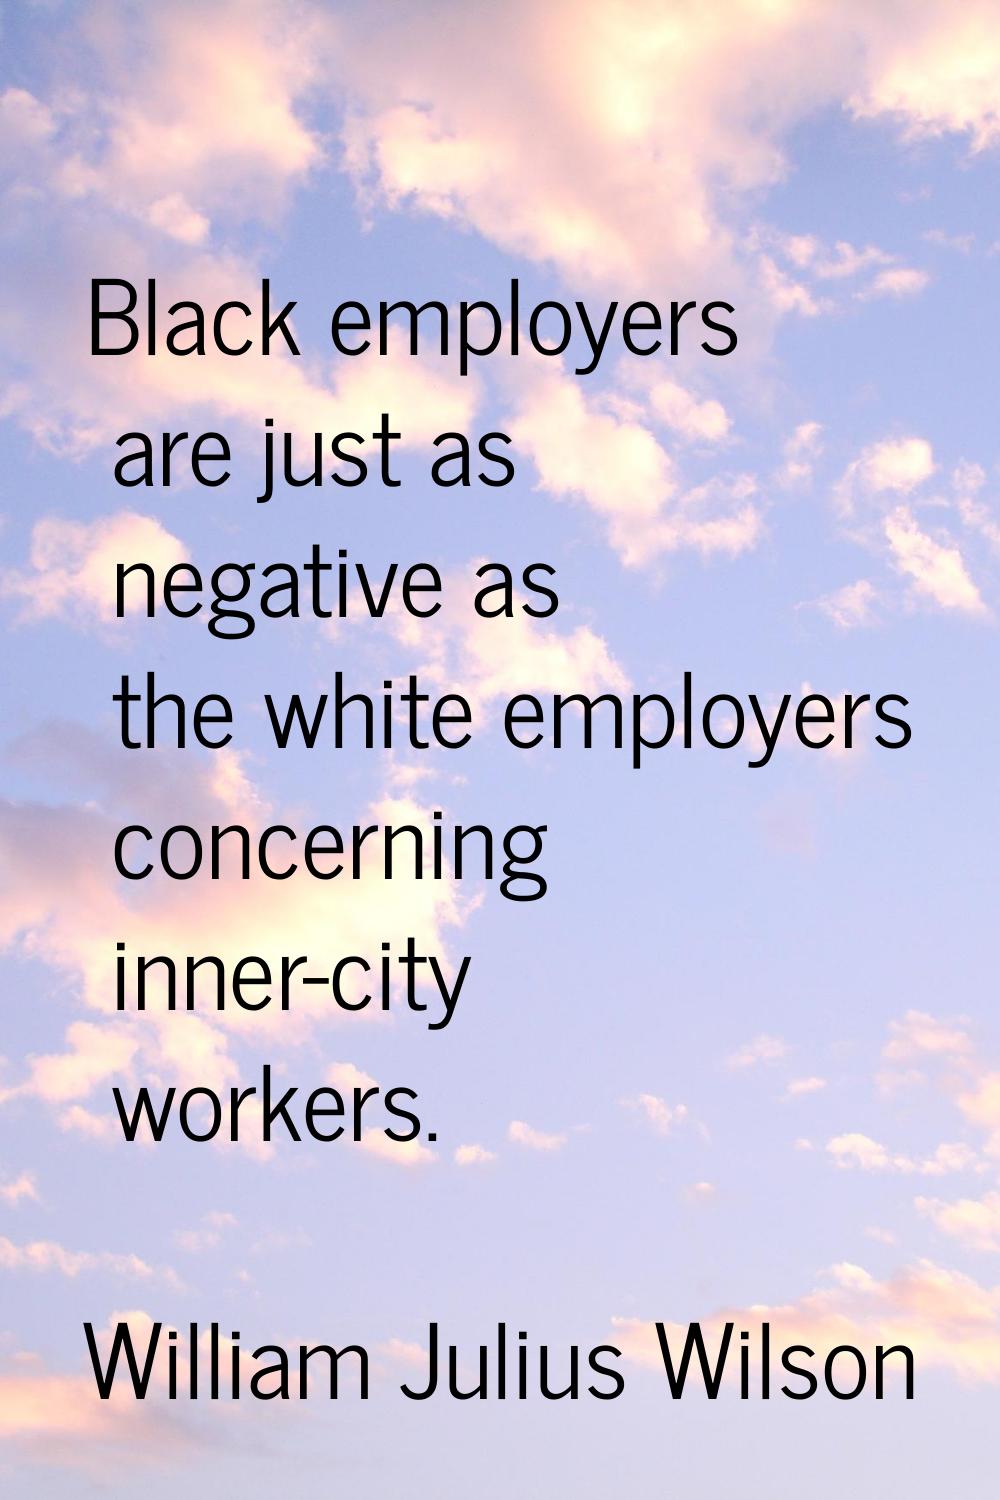 Black employers are just as negative as the white employers concerning inner-city workers.